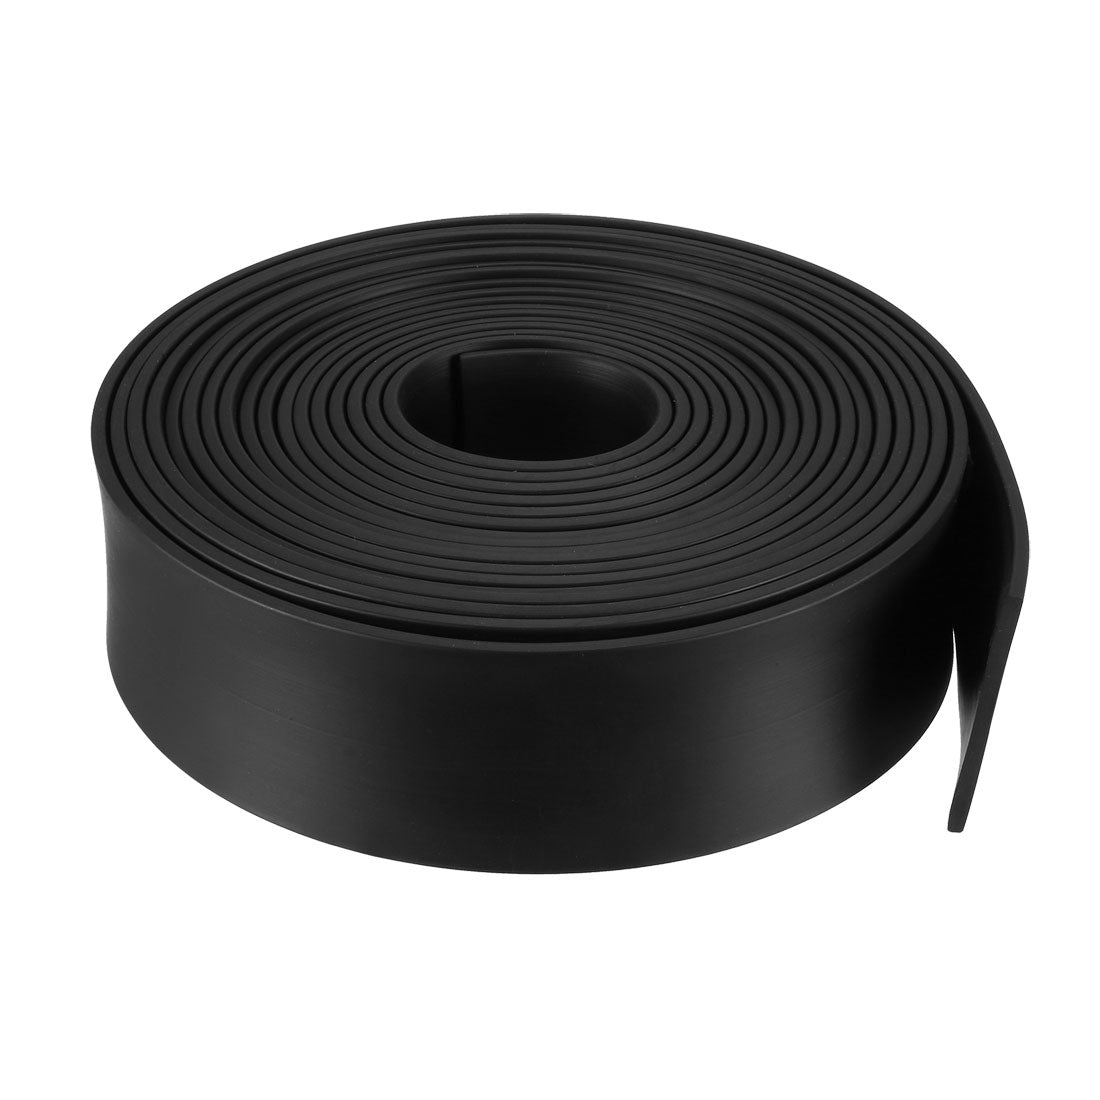 uxcell Uxcell Solid Rectangle Rubber Seal Strip 60mm Wide 3mm Thick, 3 Meters Long Black